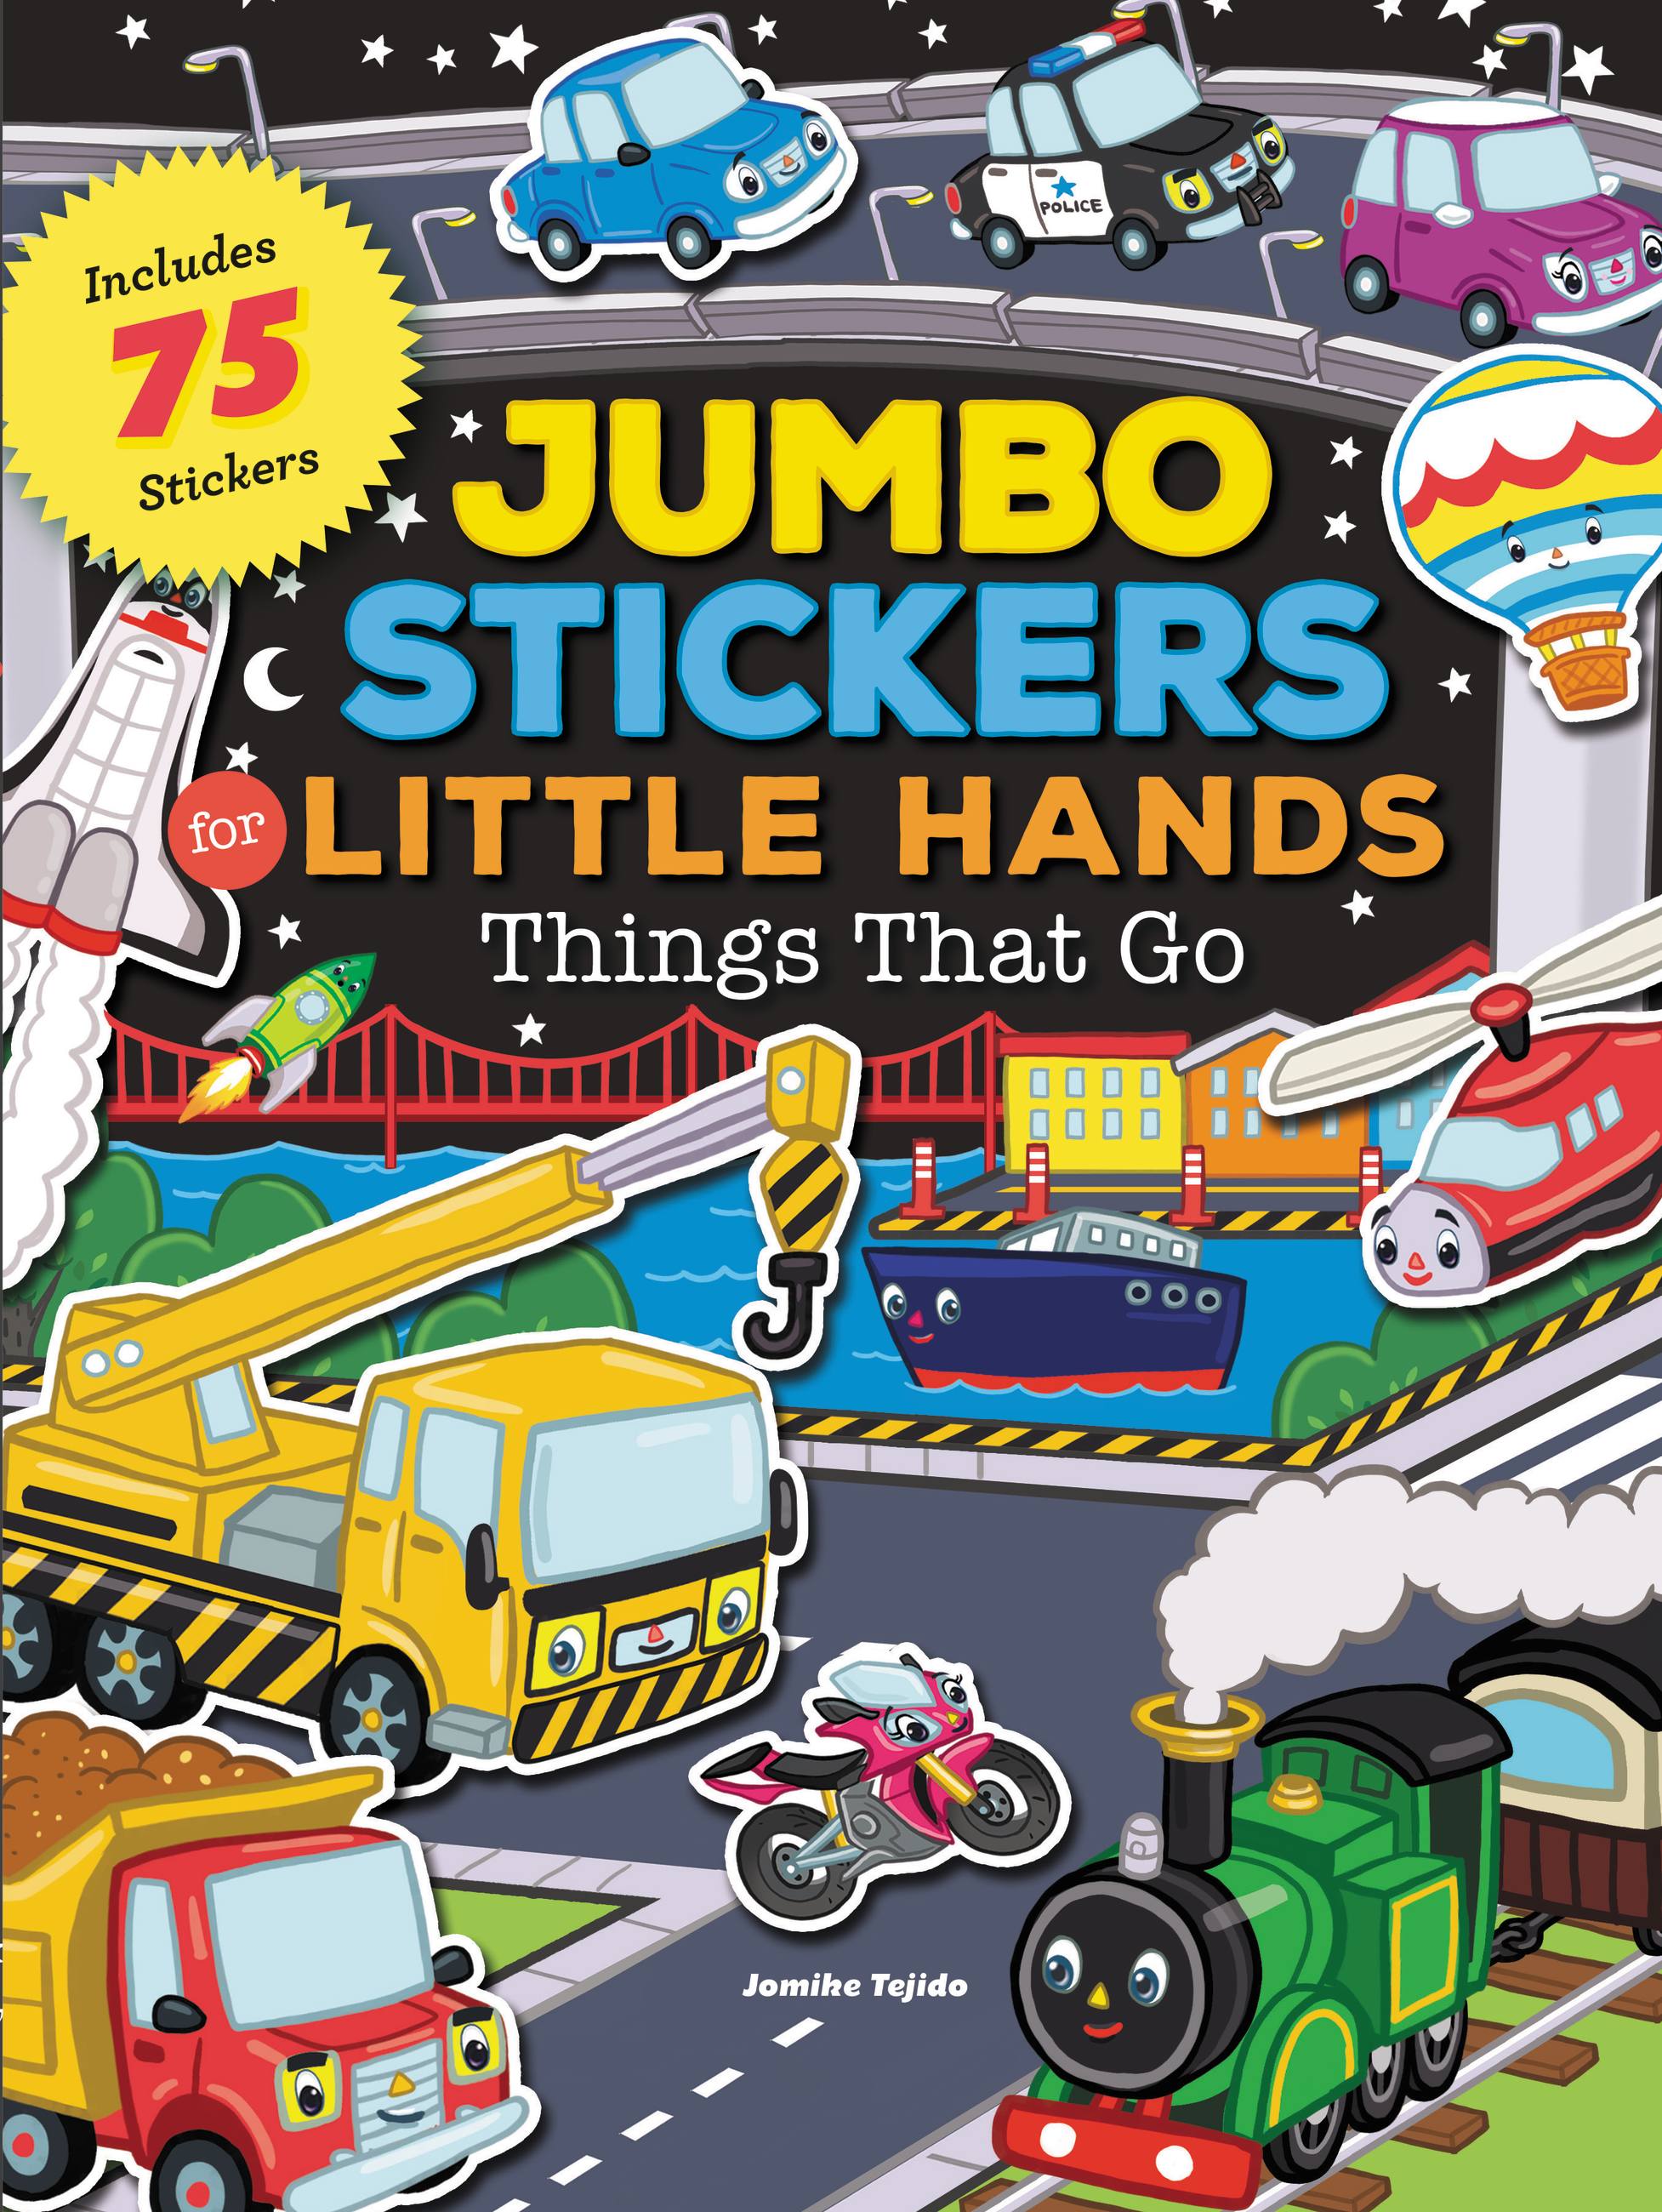 Things That Go (Jumbo Stickers Little Hands)